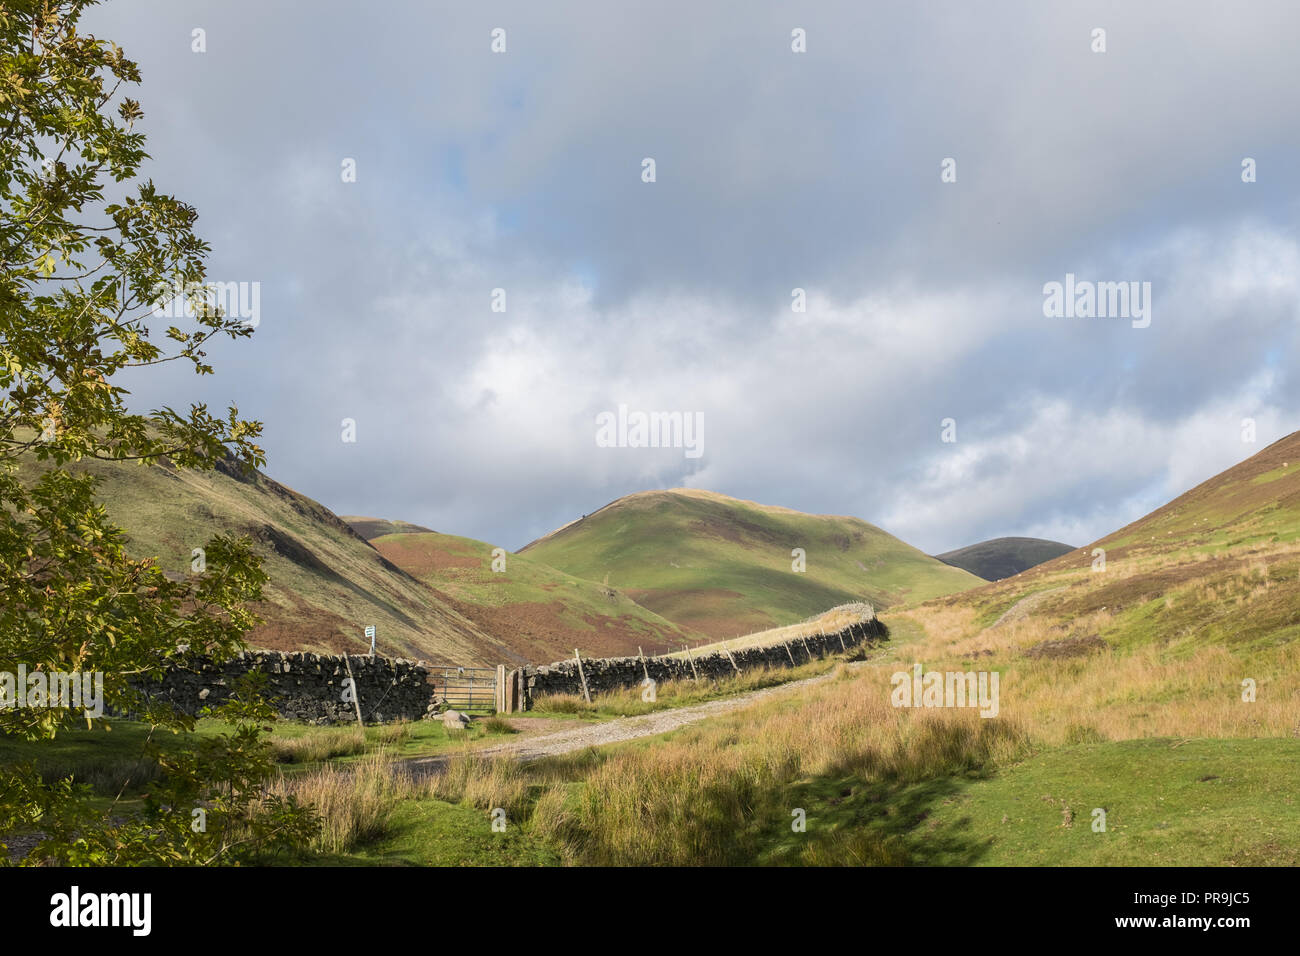 View of the landscape near the village of Durisdeer in south west Scotland. Stock Photo